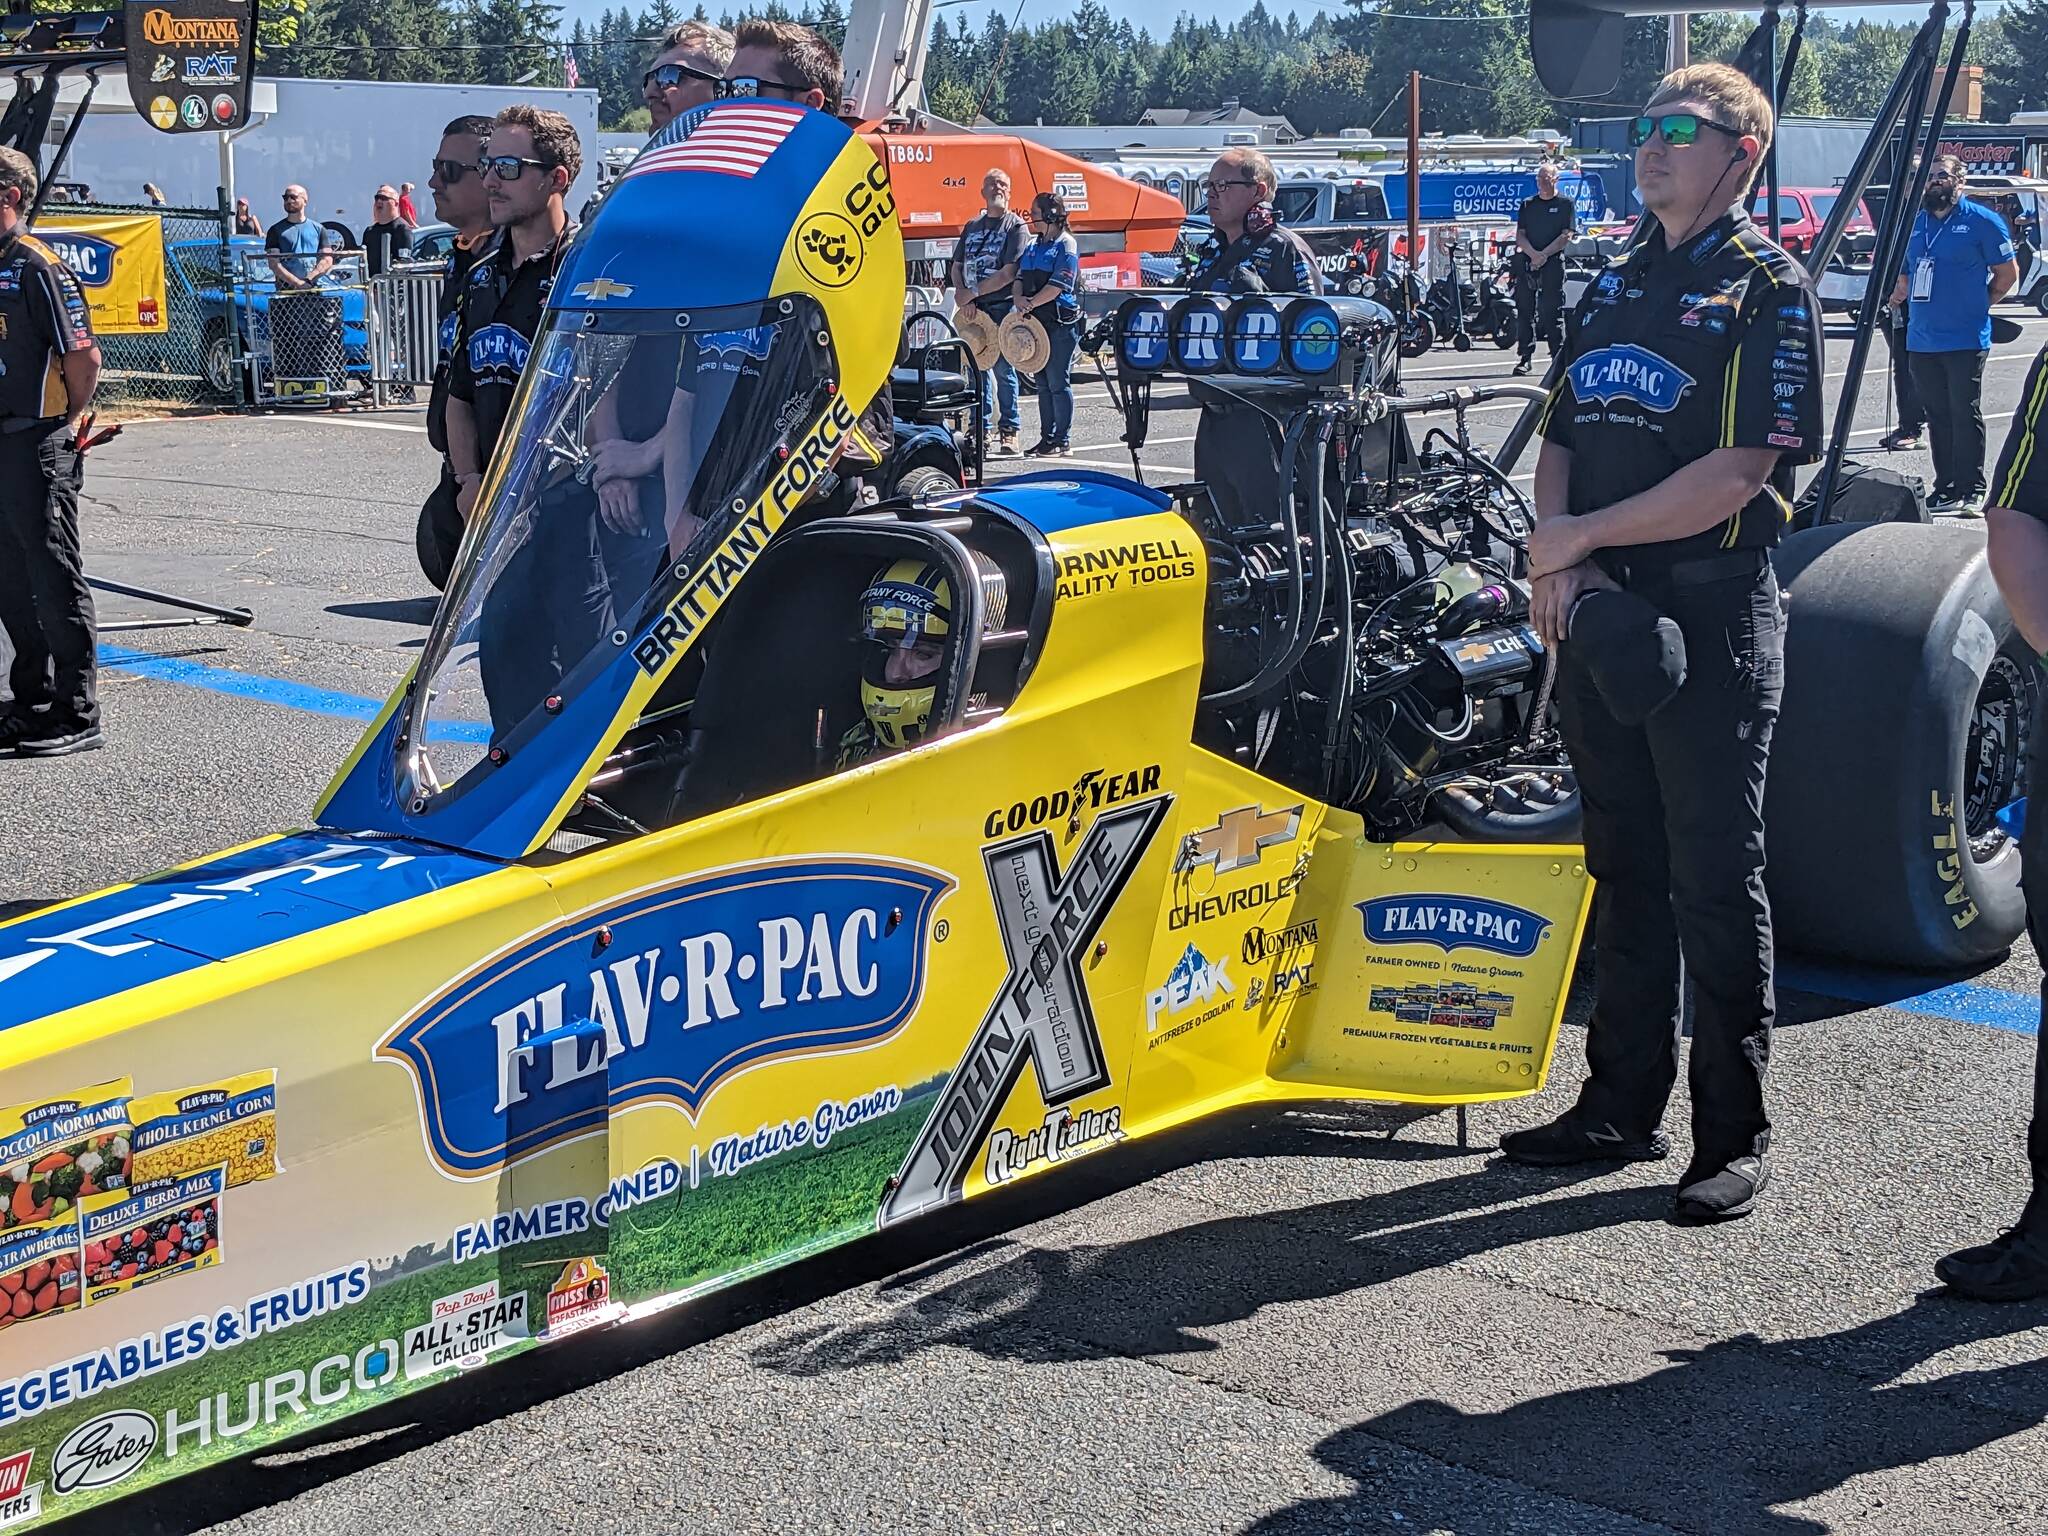 2022 Top Fuel Champion Brittany Force prepares for the ladder on July 22. (Photos by Ben Ray / Sound Publishing)